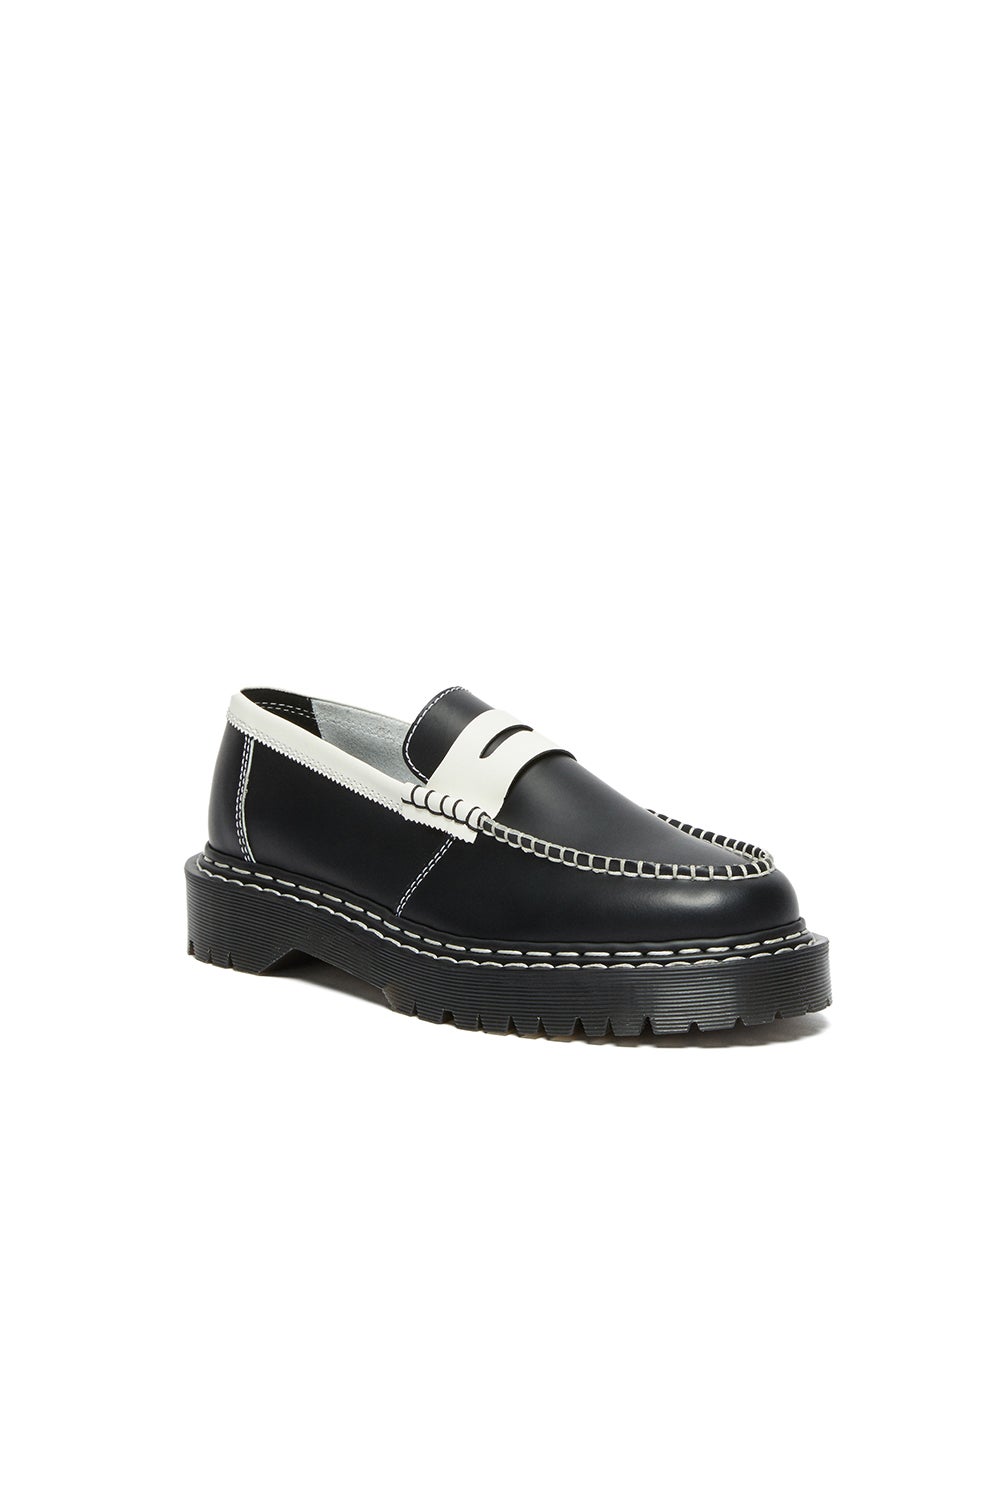 Dr. Martens Penton Leather Contrast Loafer Black with White